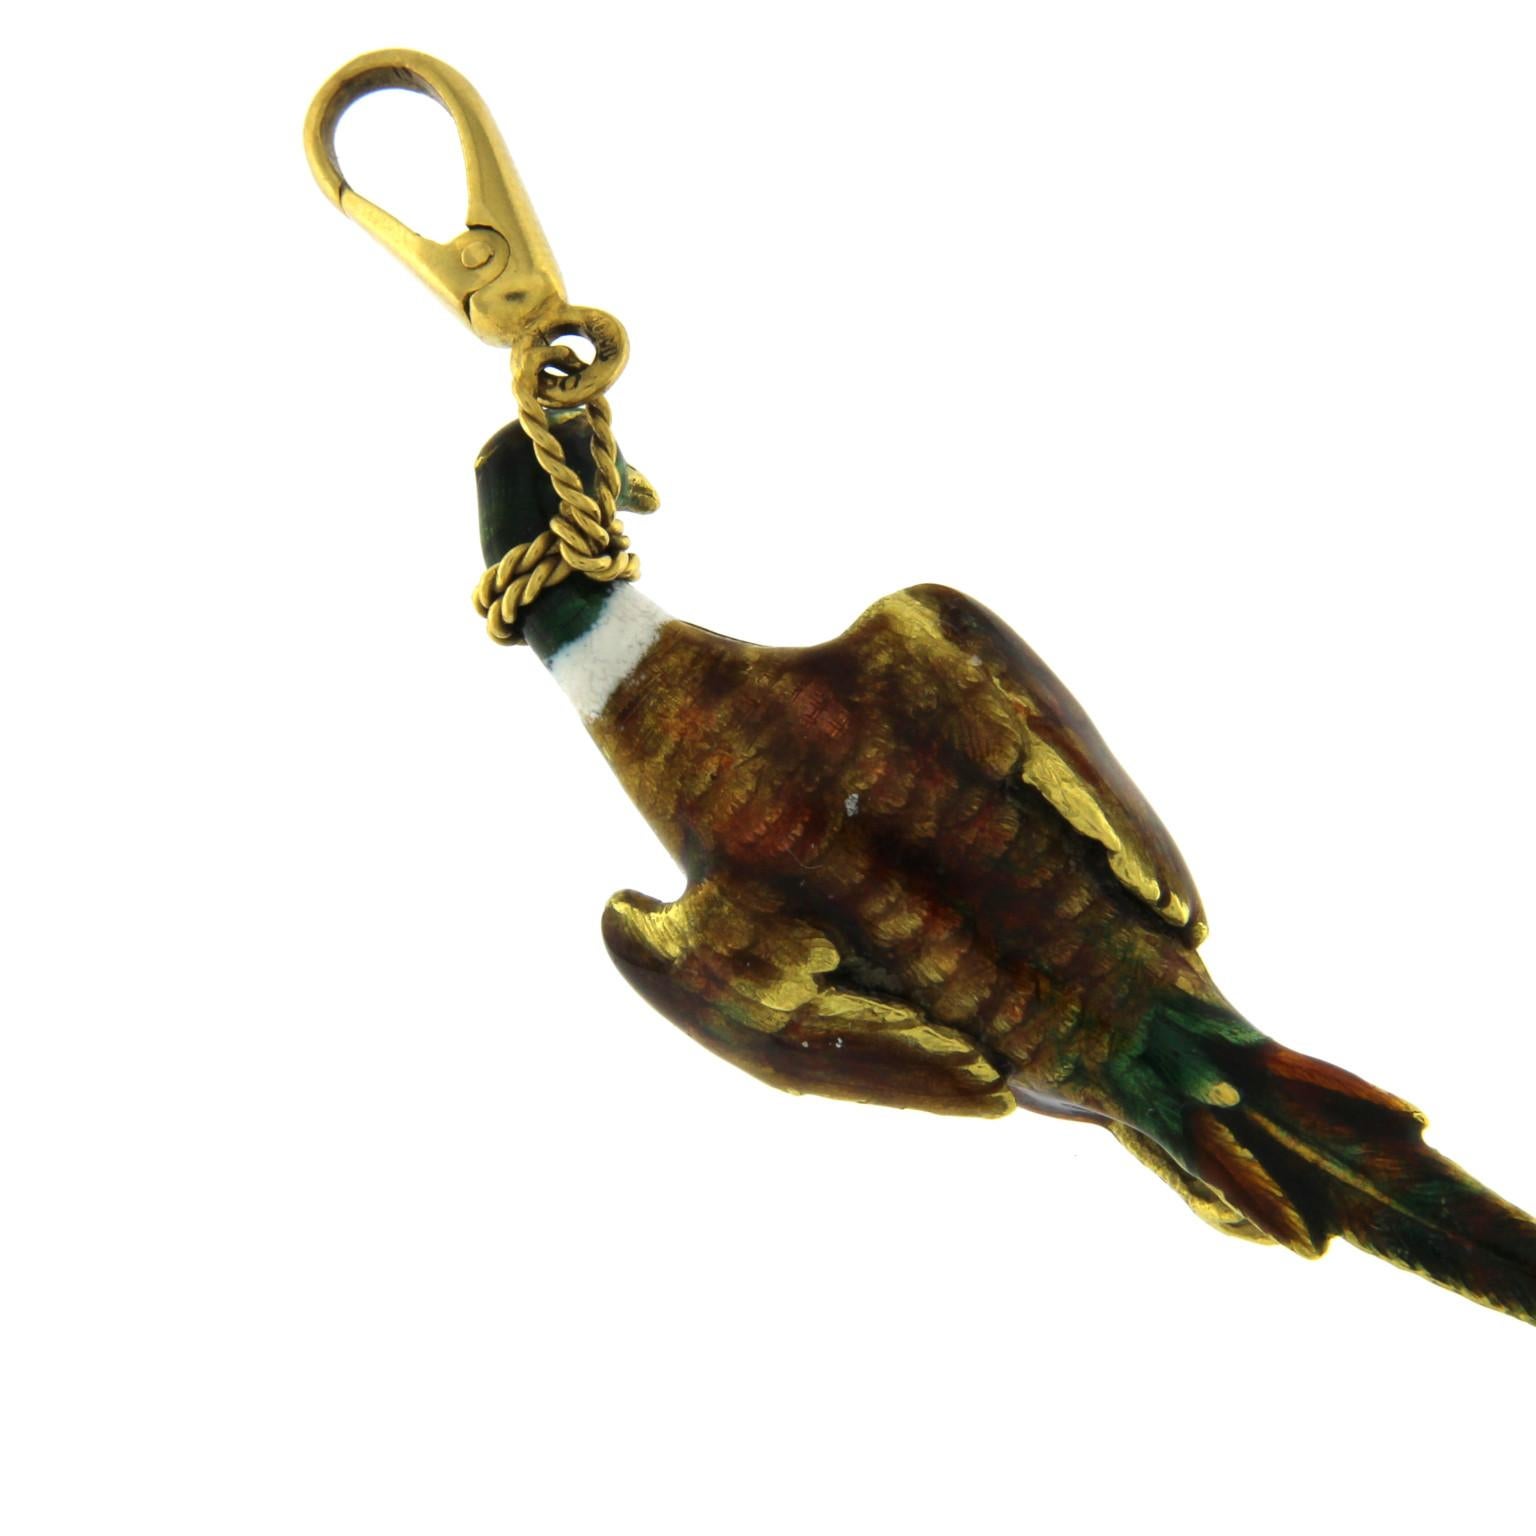 Duck/pheasant Charm 18k enameled with small carabiner hook
total weight of gold GR 20.80
Stamp 750